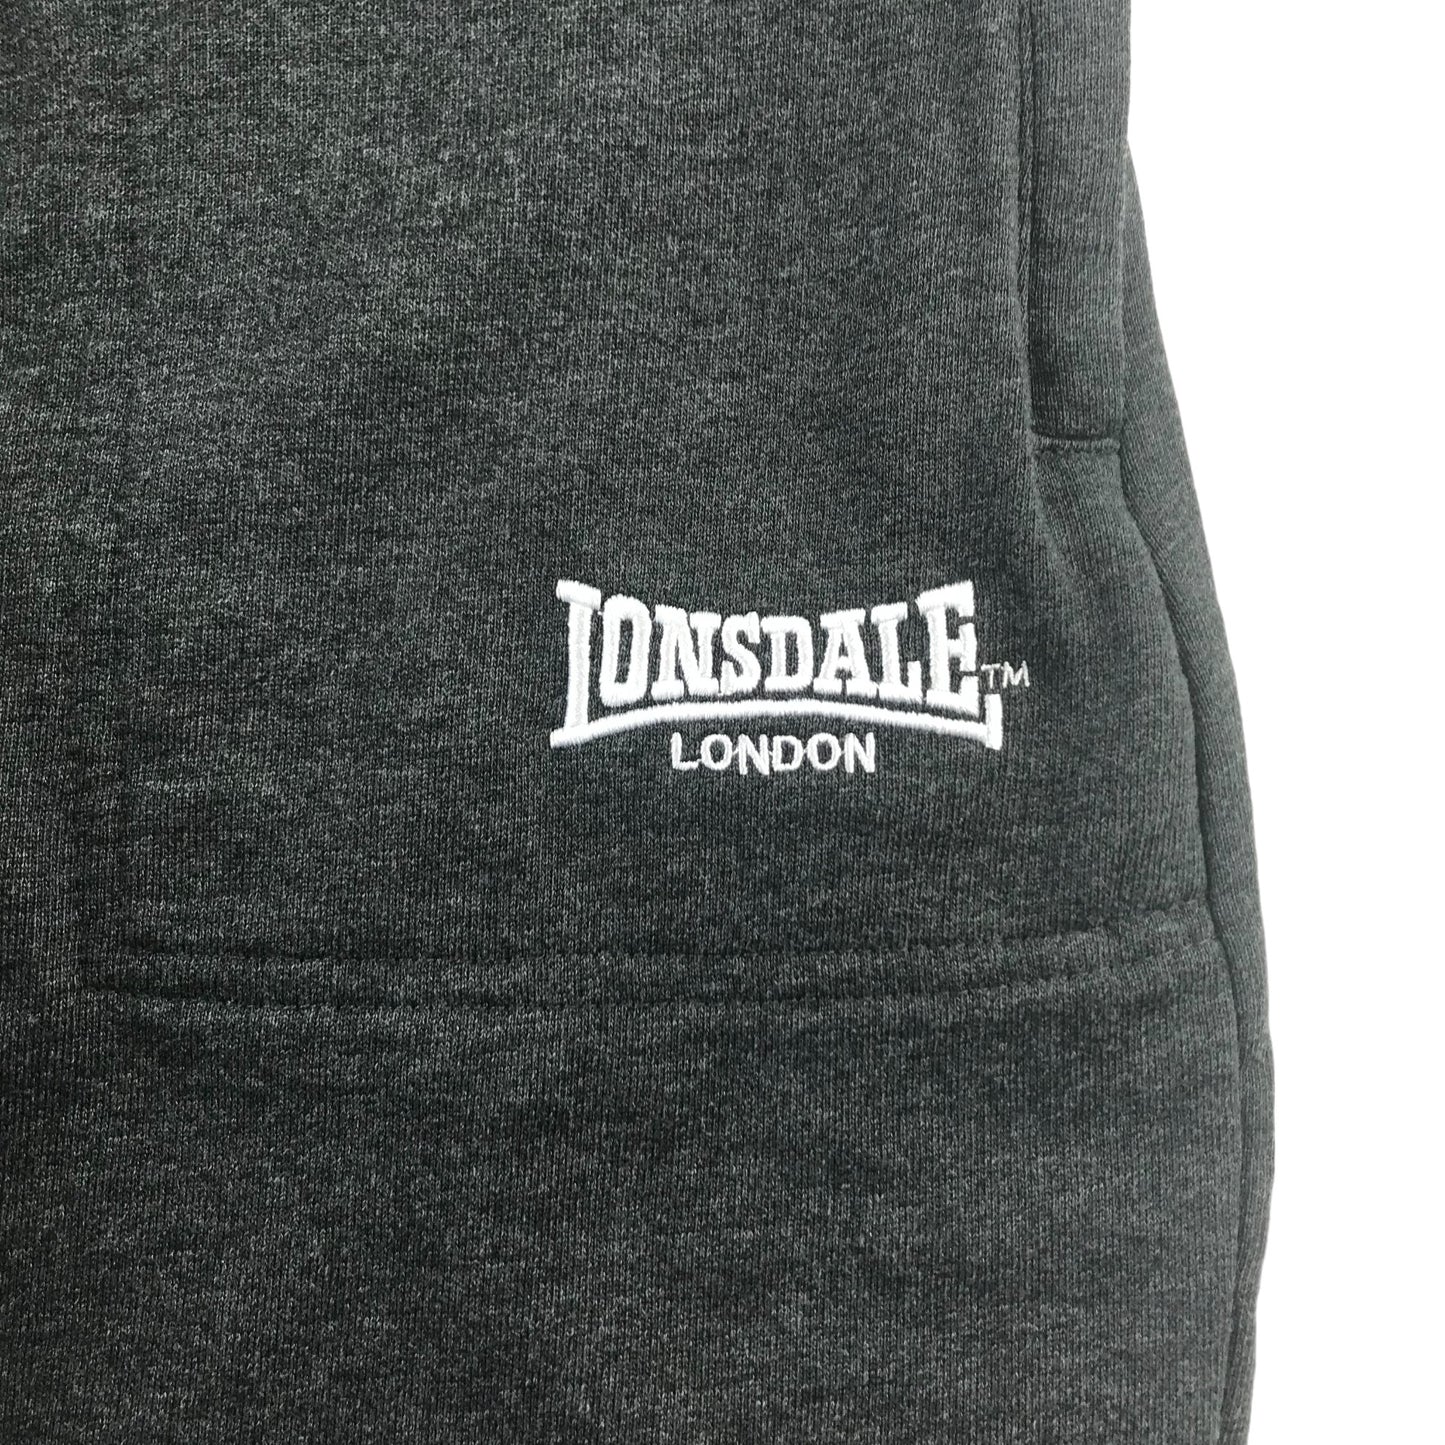 Lonsdale Jersey Short Adult XS Grey Plain With White Logo